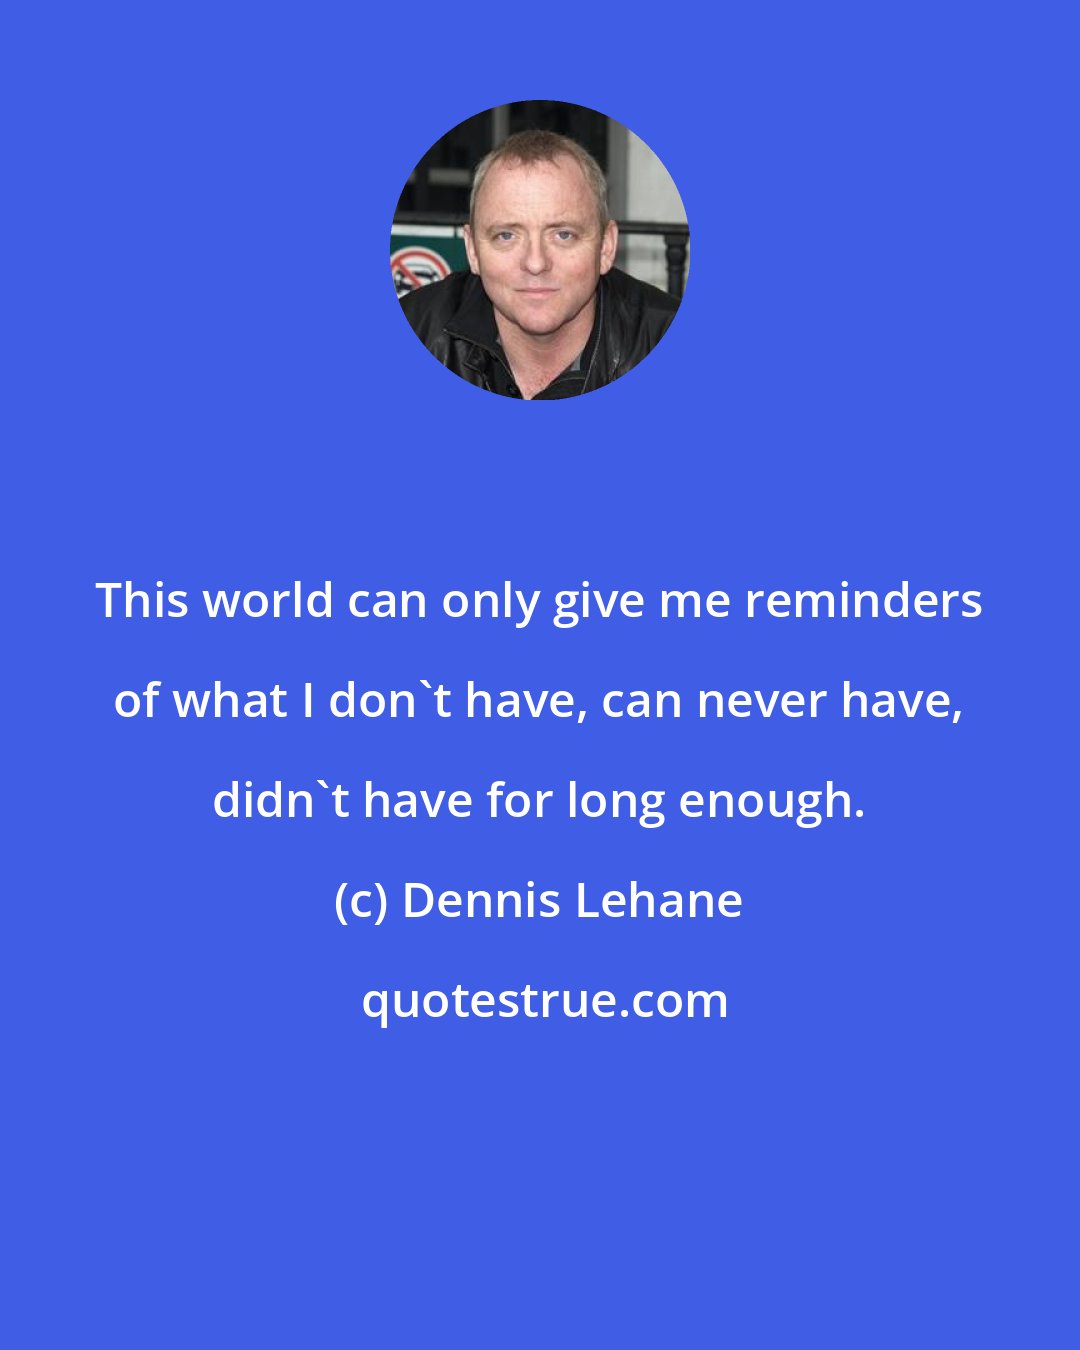 Dennis Lehane: This world can only give me reminders of what I don't have, can never have, didn't have for long enough.